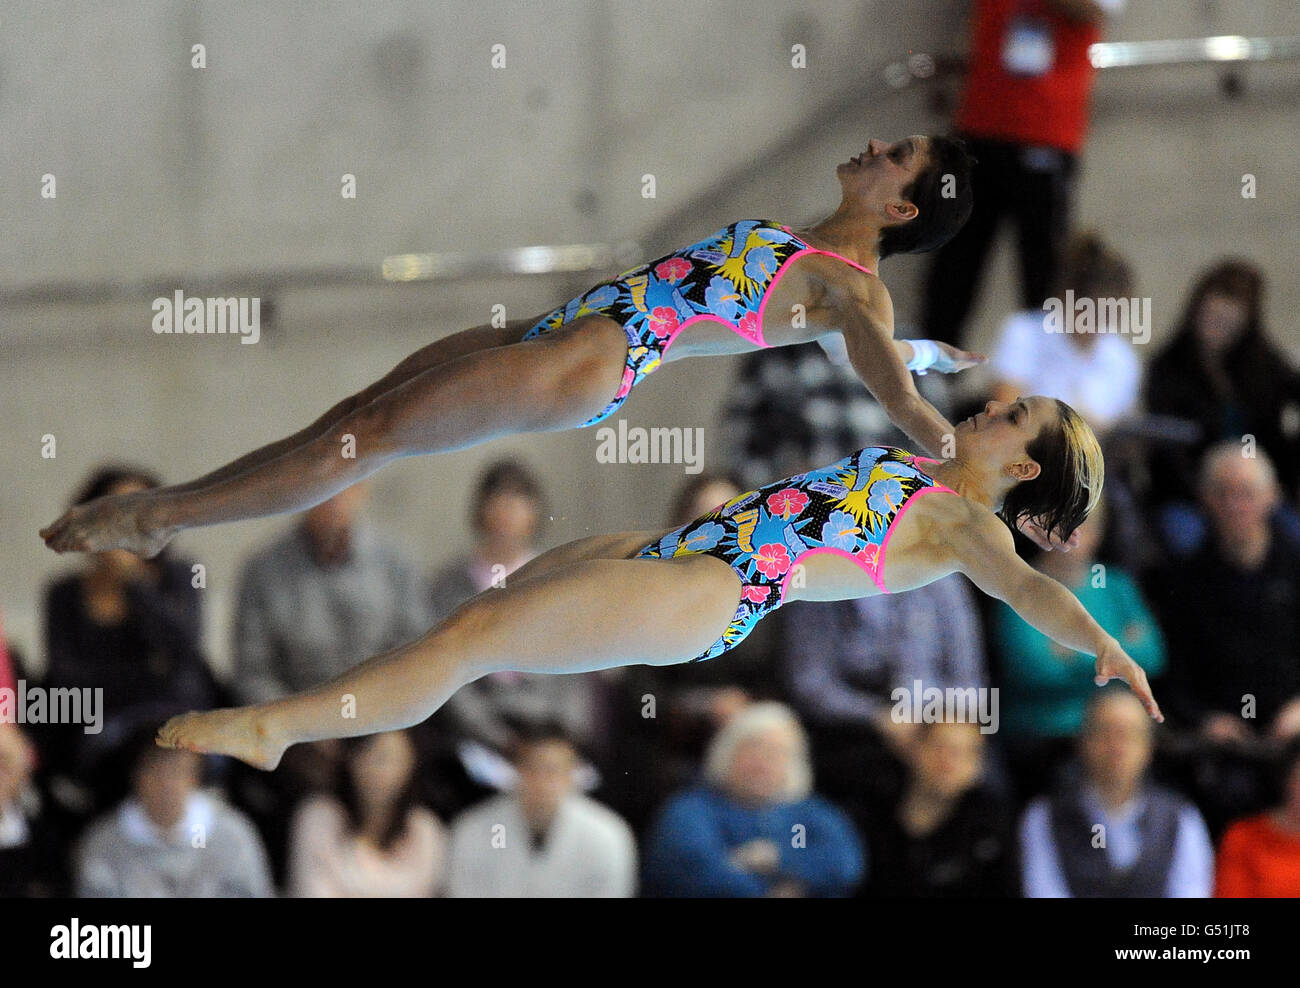 Diving - 18th FINA Visa Diving World Cup - Day Three - Olympic Aquatics Centre. Germany's Nora Subschinski and Christian Steuer Stock Photo